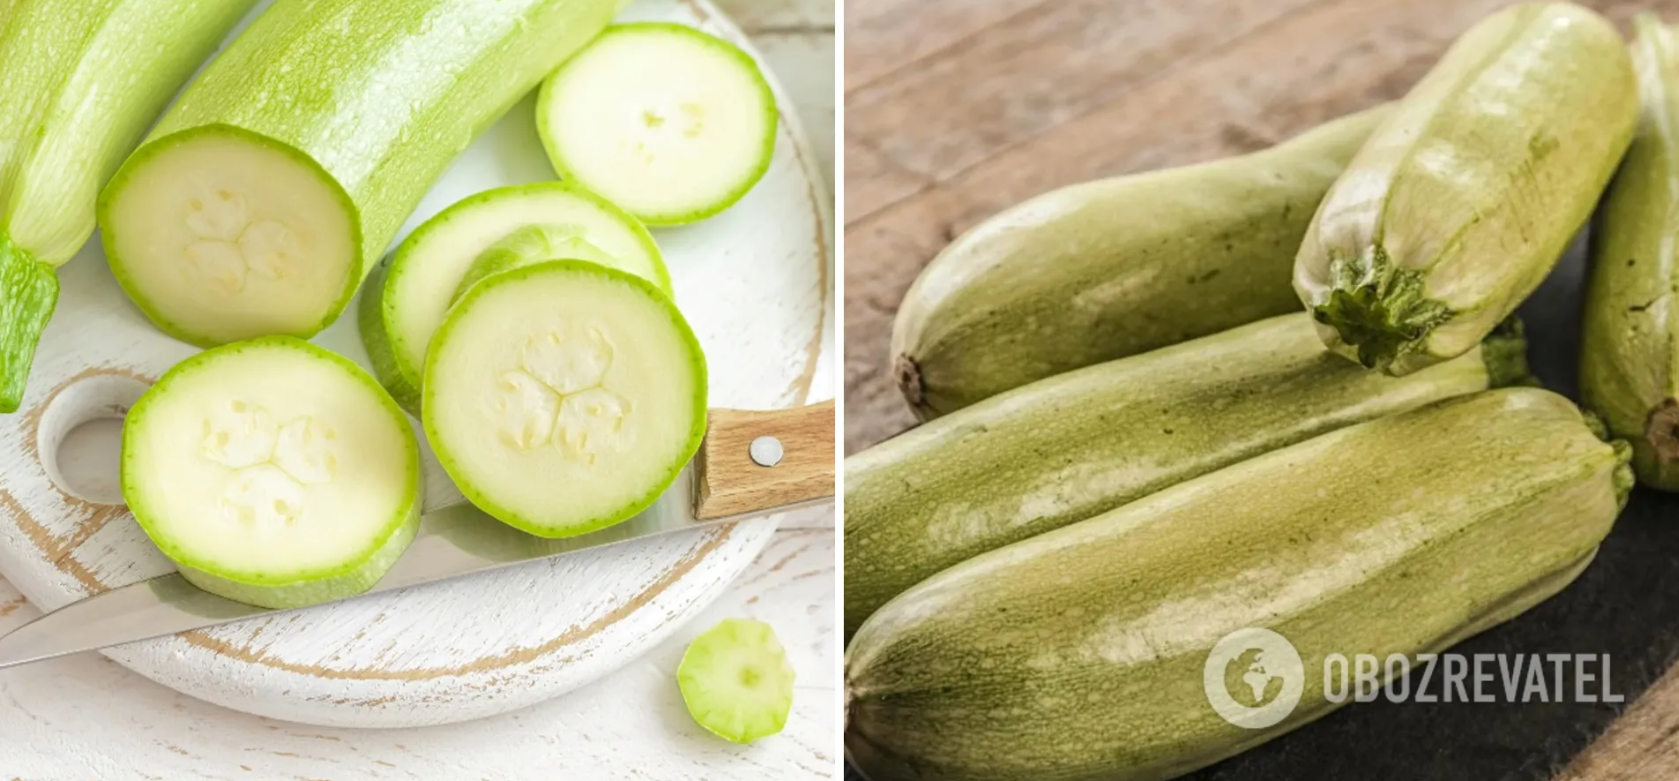 How to preserve zucchini for winter